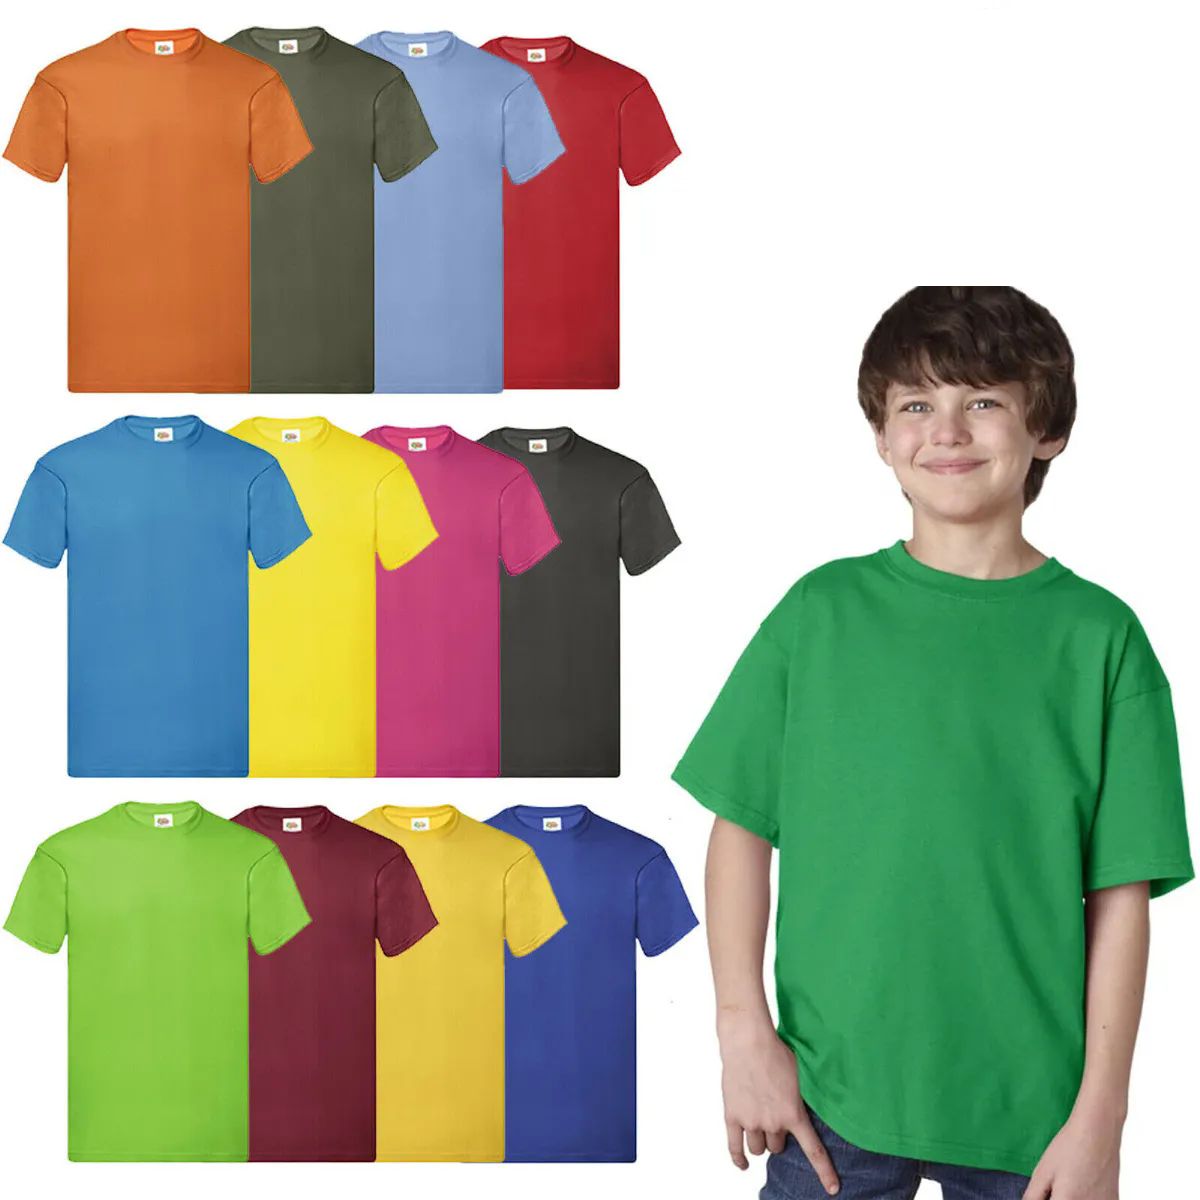 288 Pieces of Billion Hats Kids Youth Cotton Assorted Colors T Shirts Size M